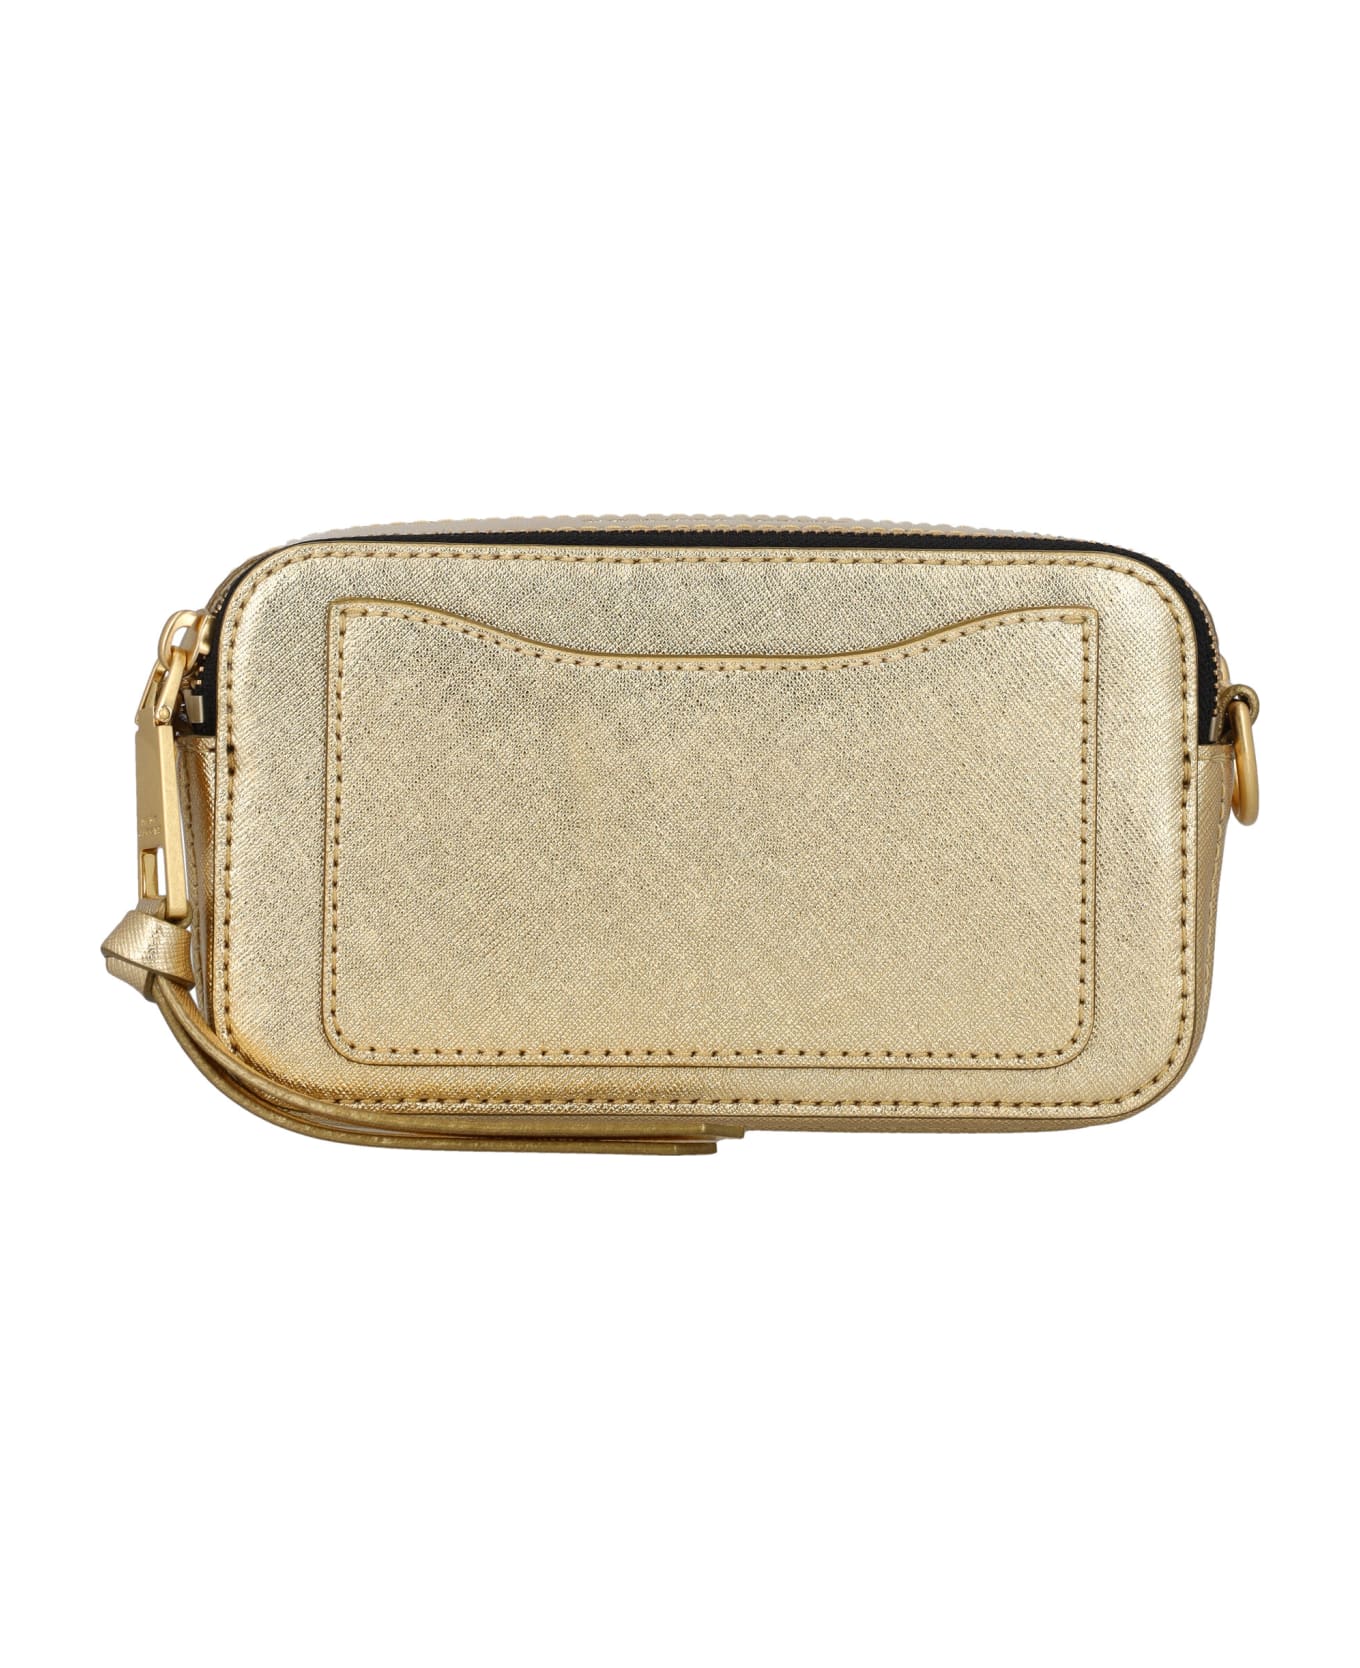 Marc Jacobs The Snapshot Bag - GOLD